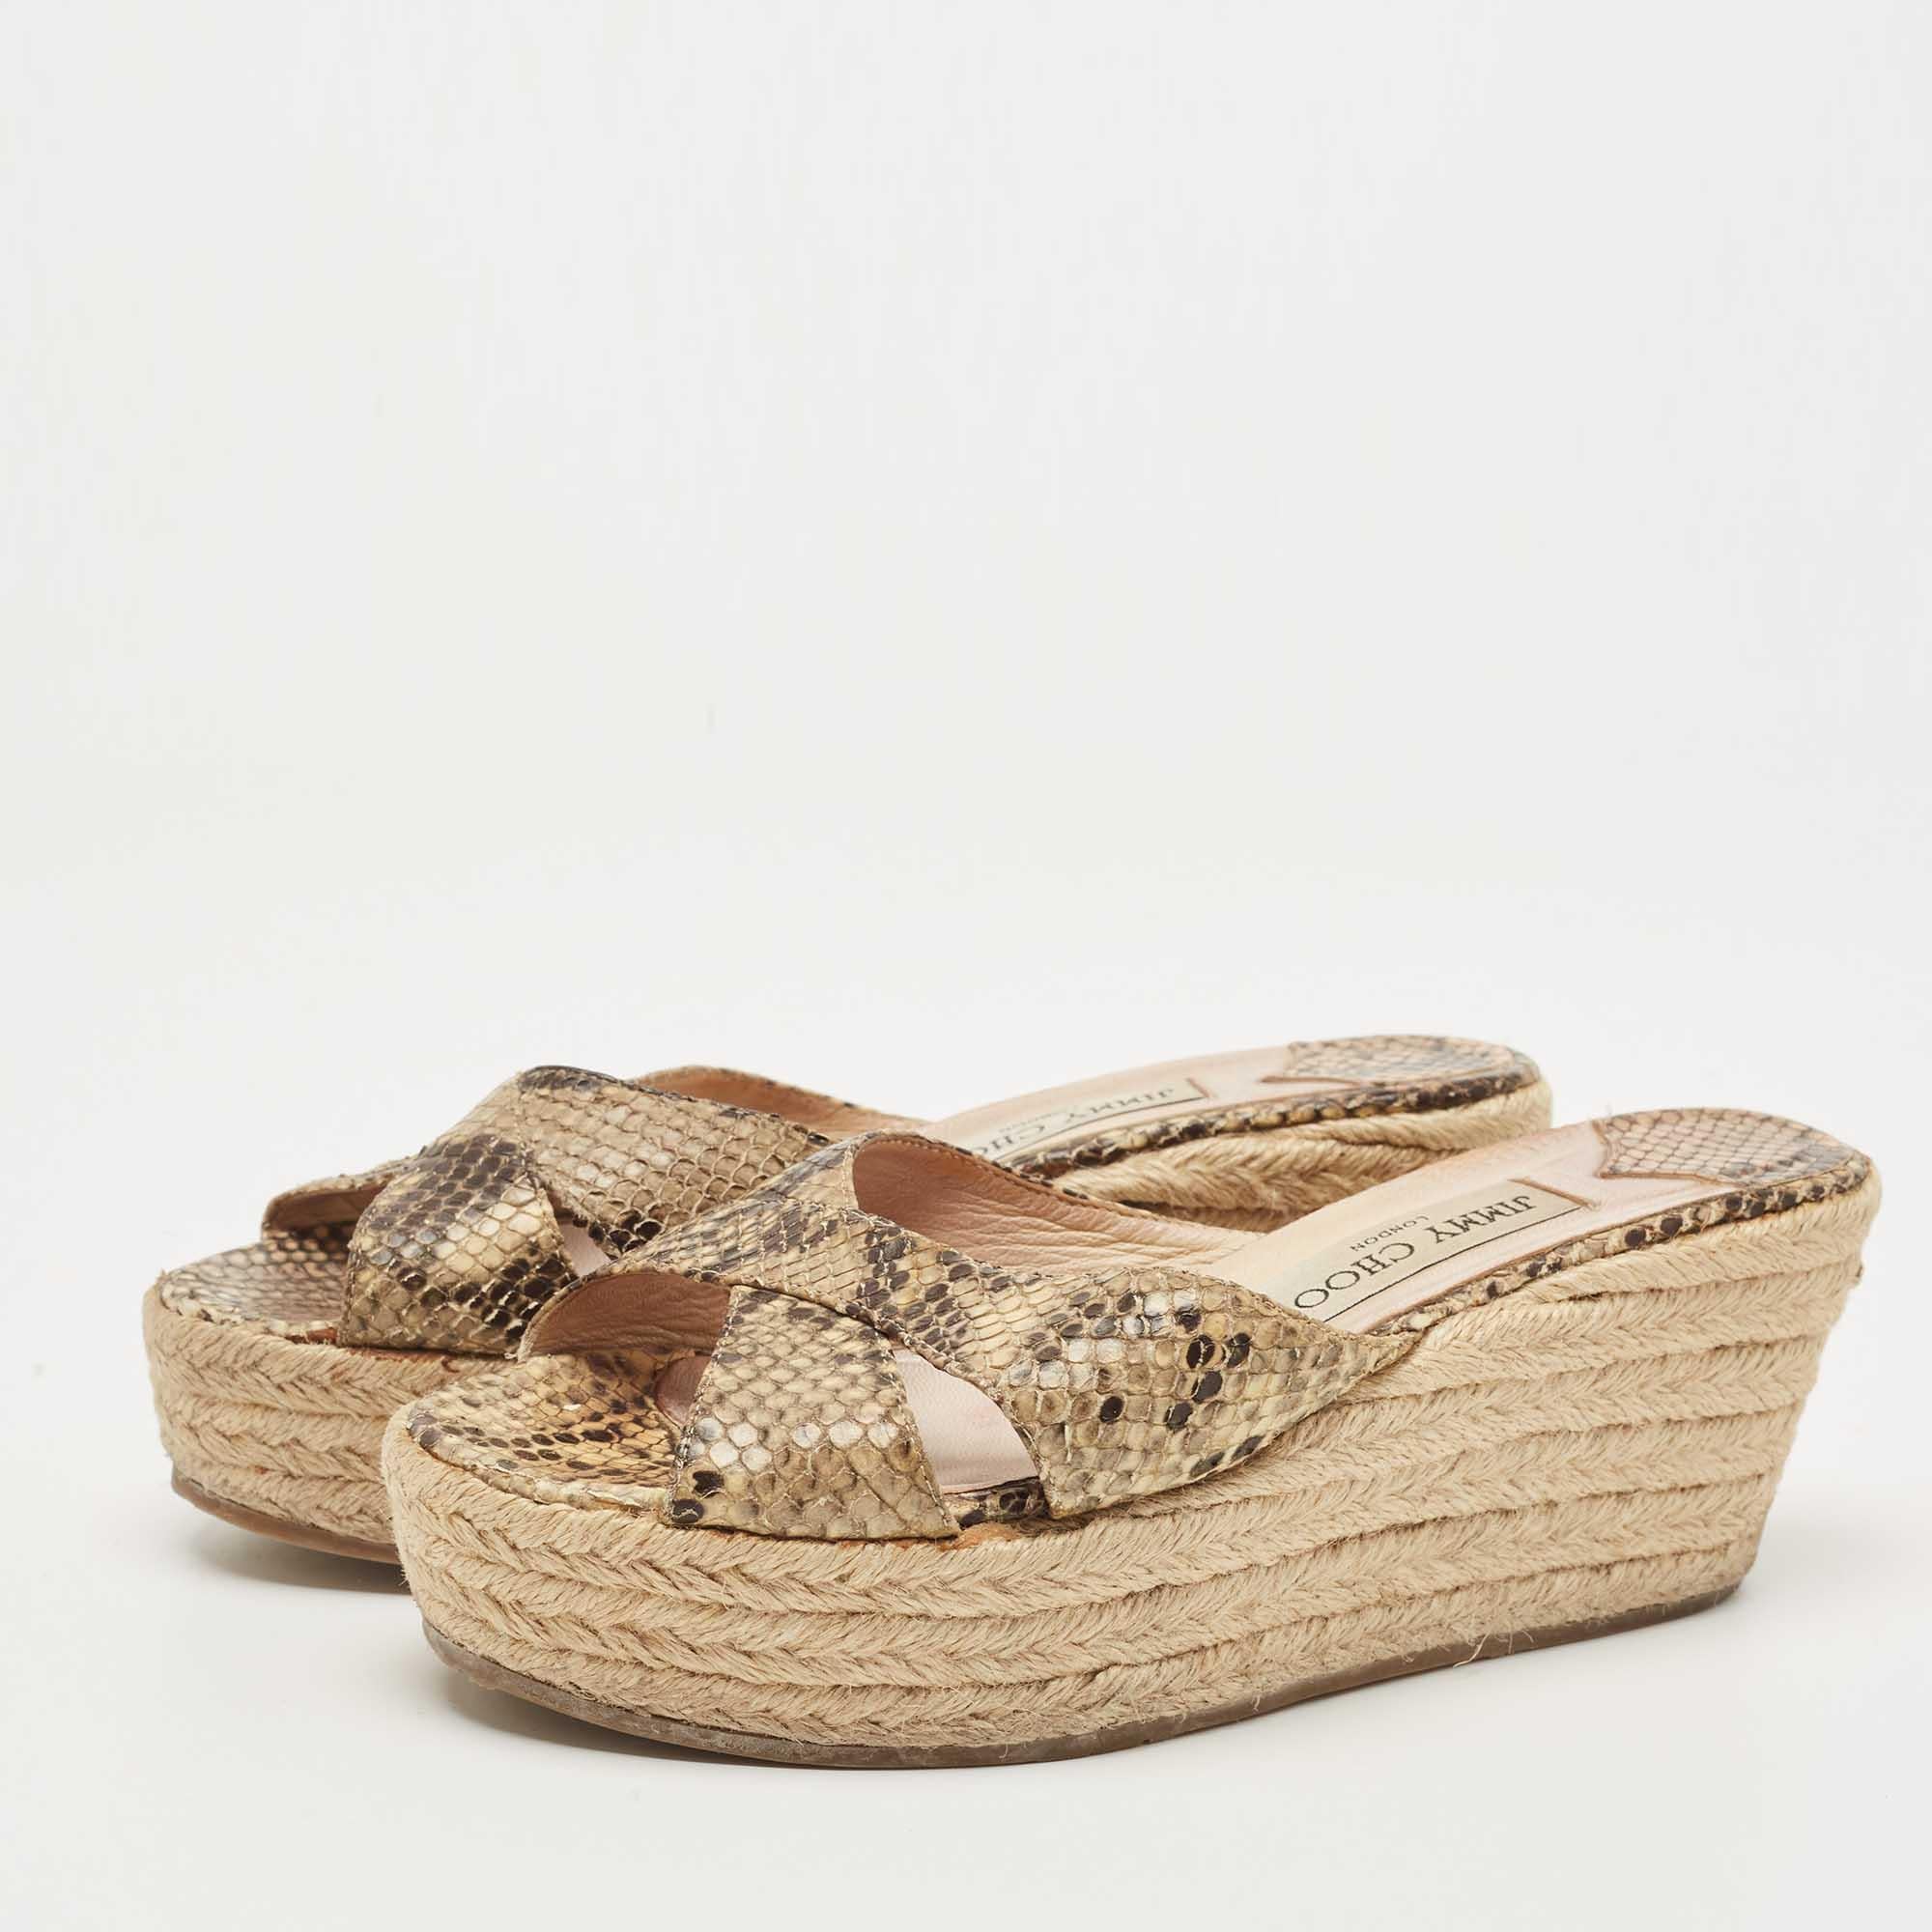 Jimmy Choo Beige/Brown Python Embossed Leather Phyllis Wedge Espadrille Slide Sa In Good Condition For Sale In Dubai, Al Qouz 2